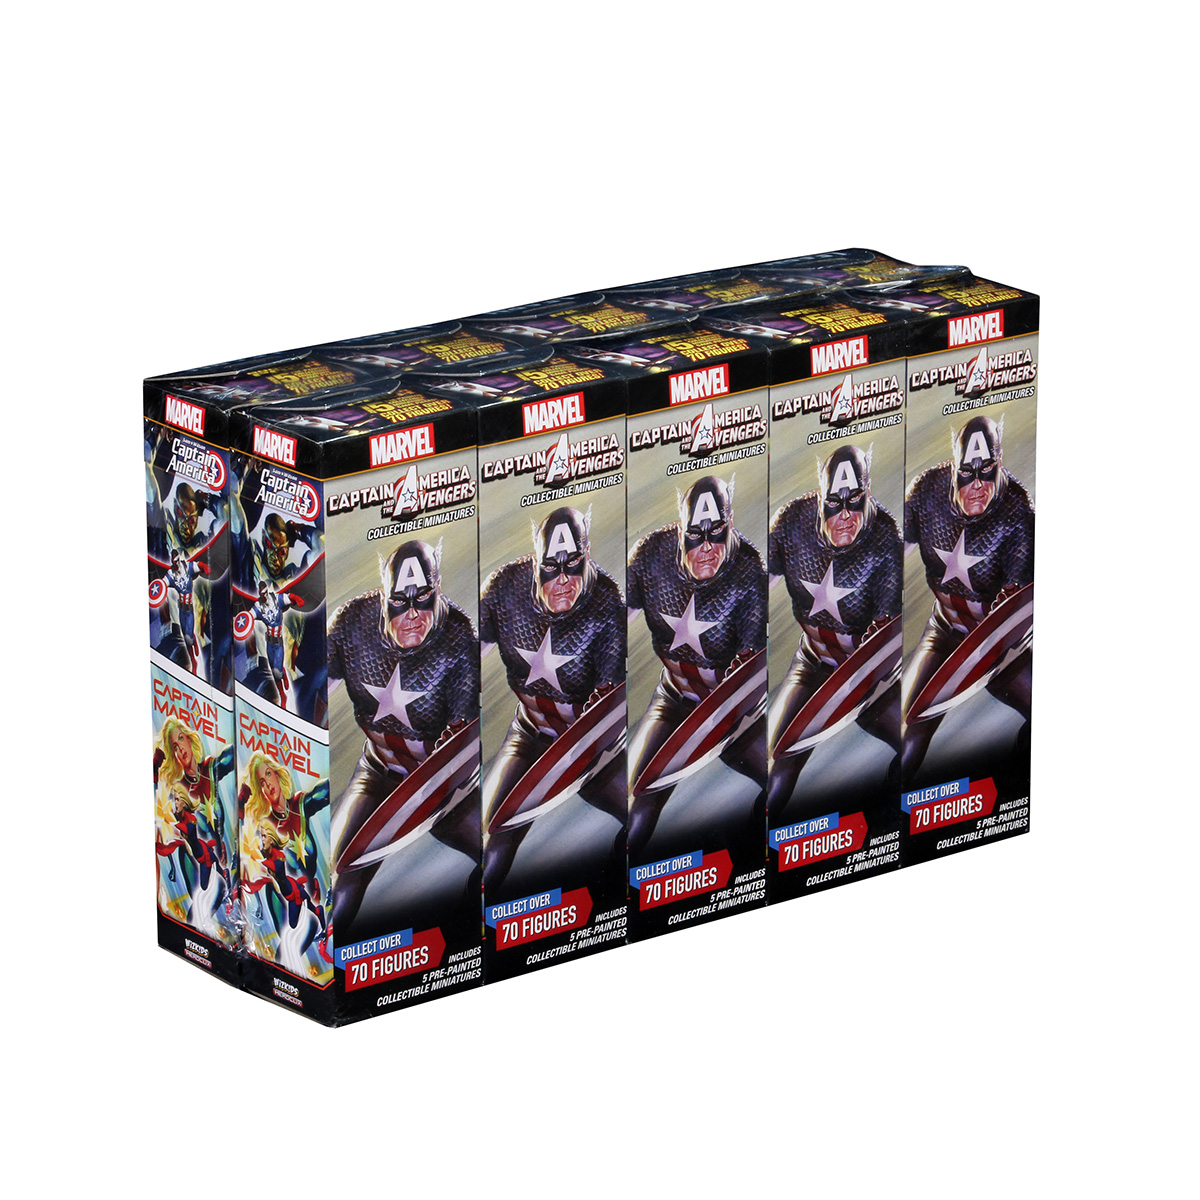 HeroClix | Marvel HeroClix: Captain America and the Avengers Pre-Release